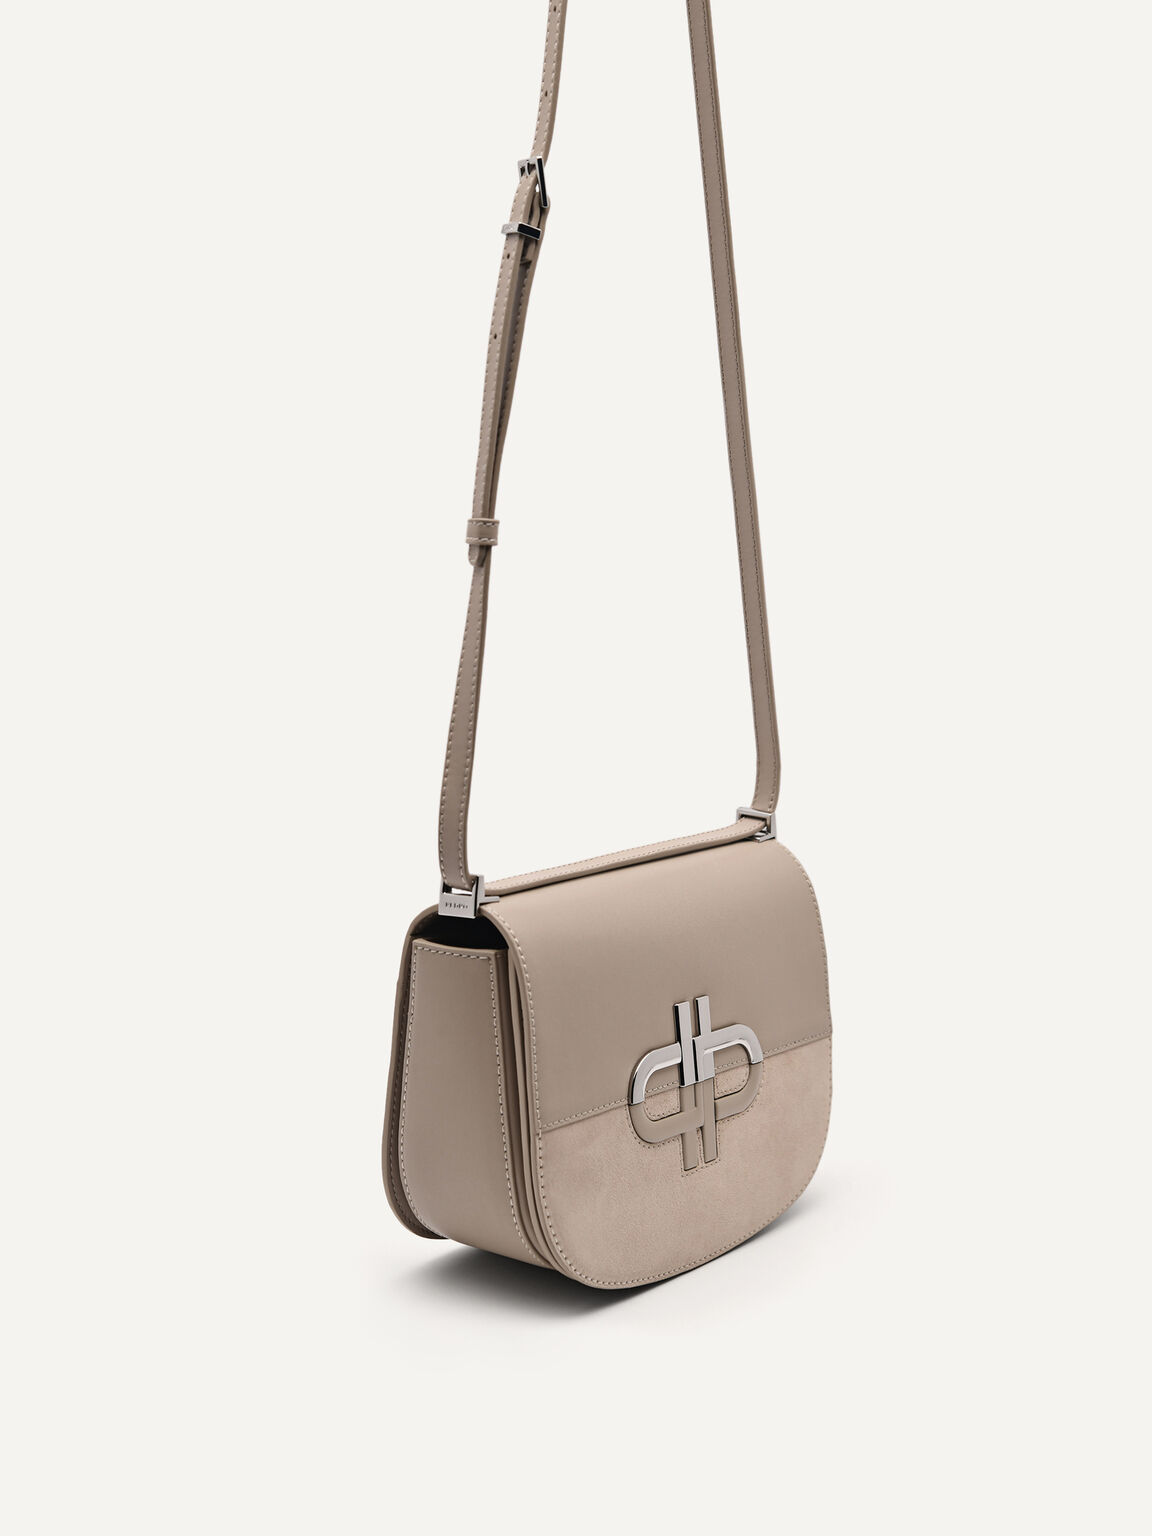 PEDRO Icon Leather Shoulder Bag, Taupe